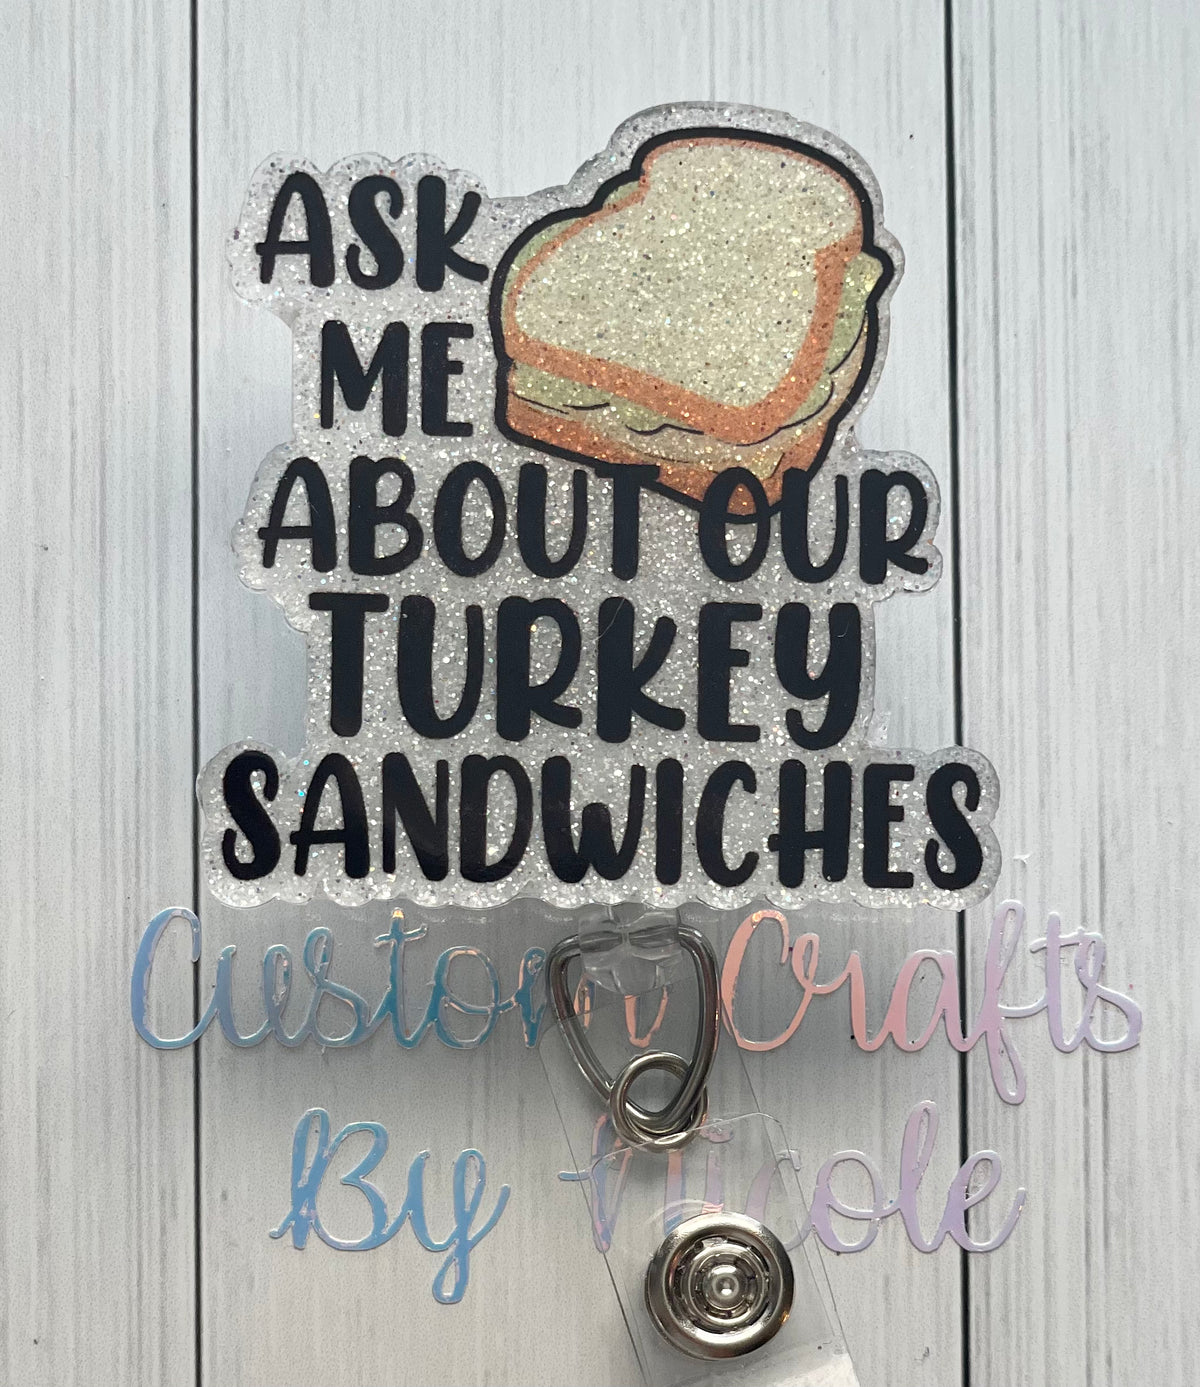 Ask me about our turkey sandwiches